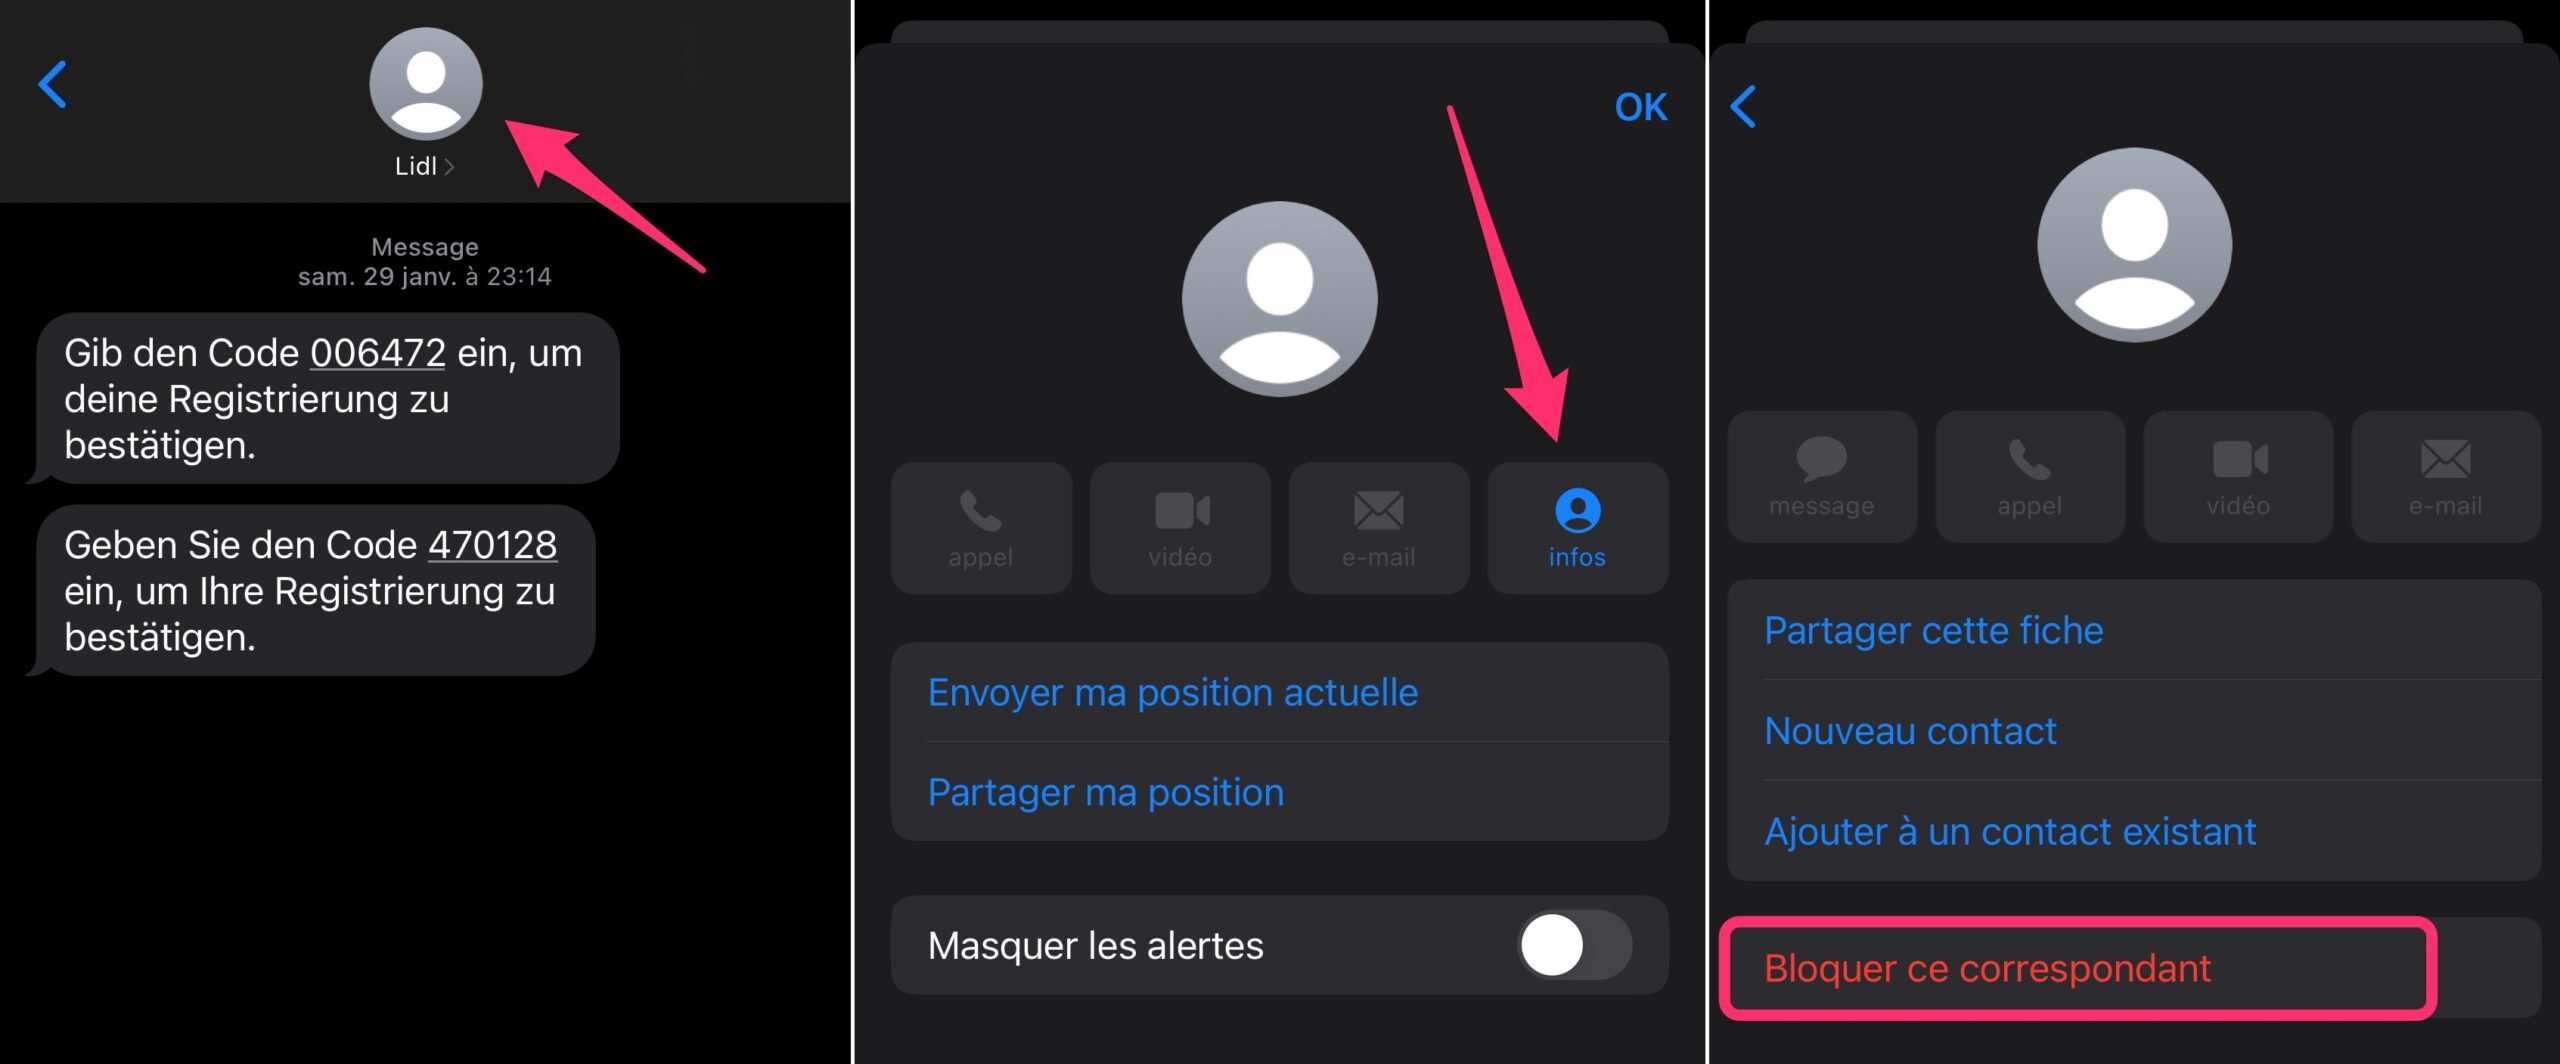 iOS settings screen with option to block a contact